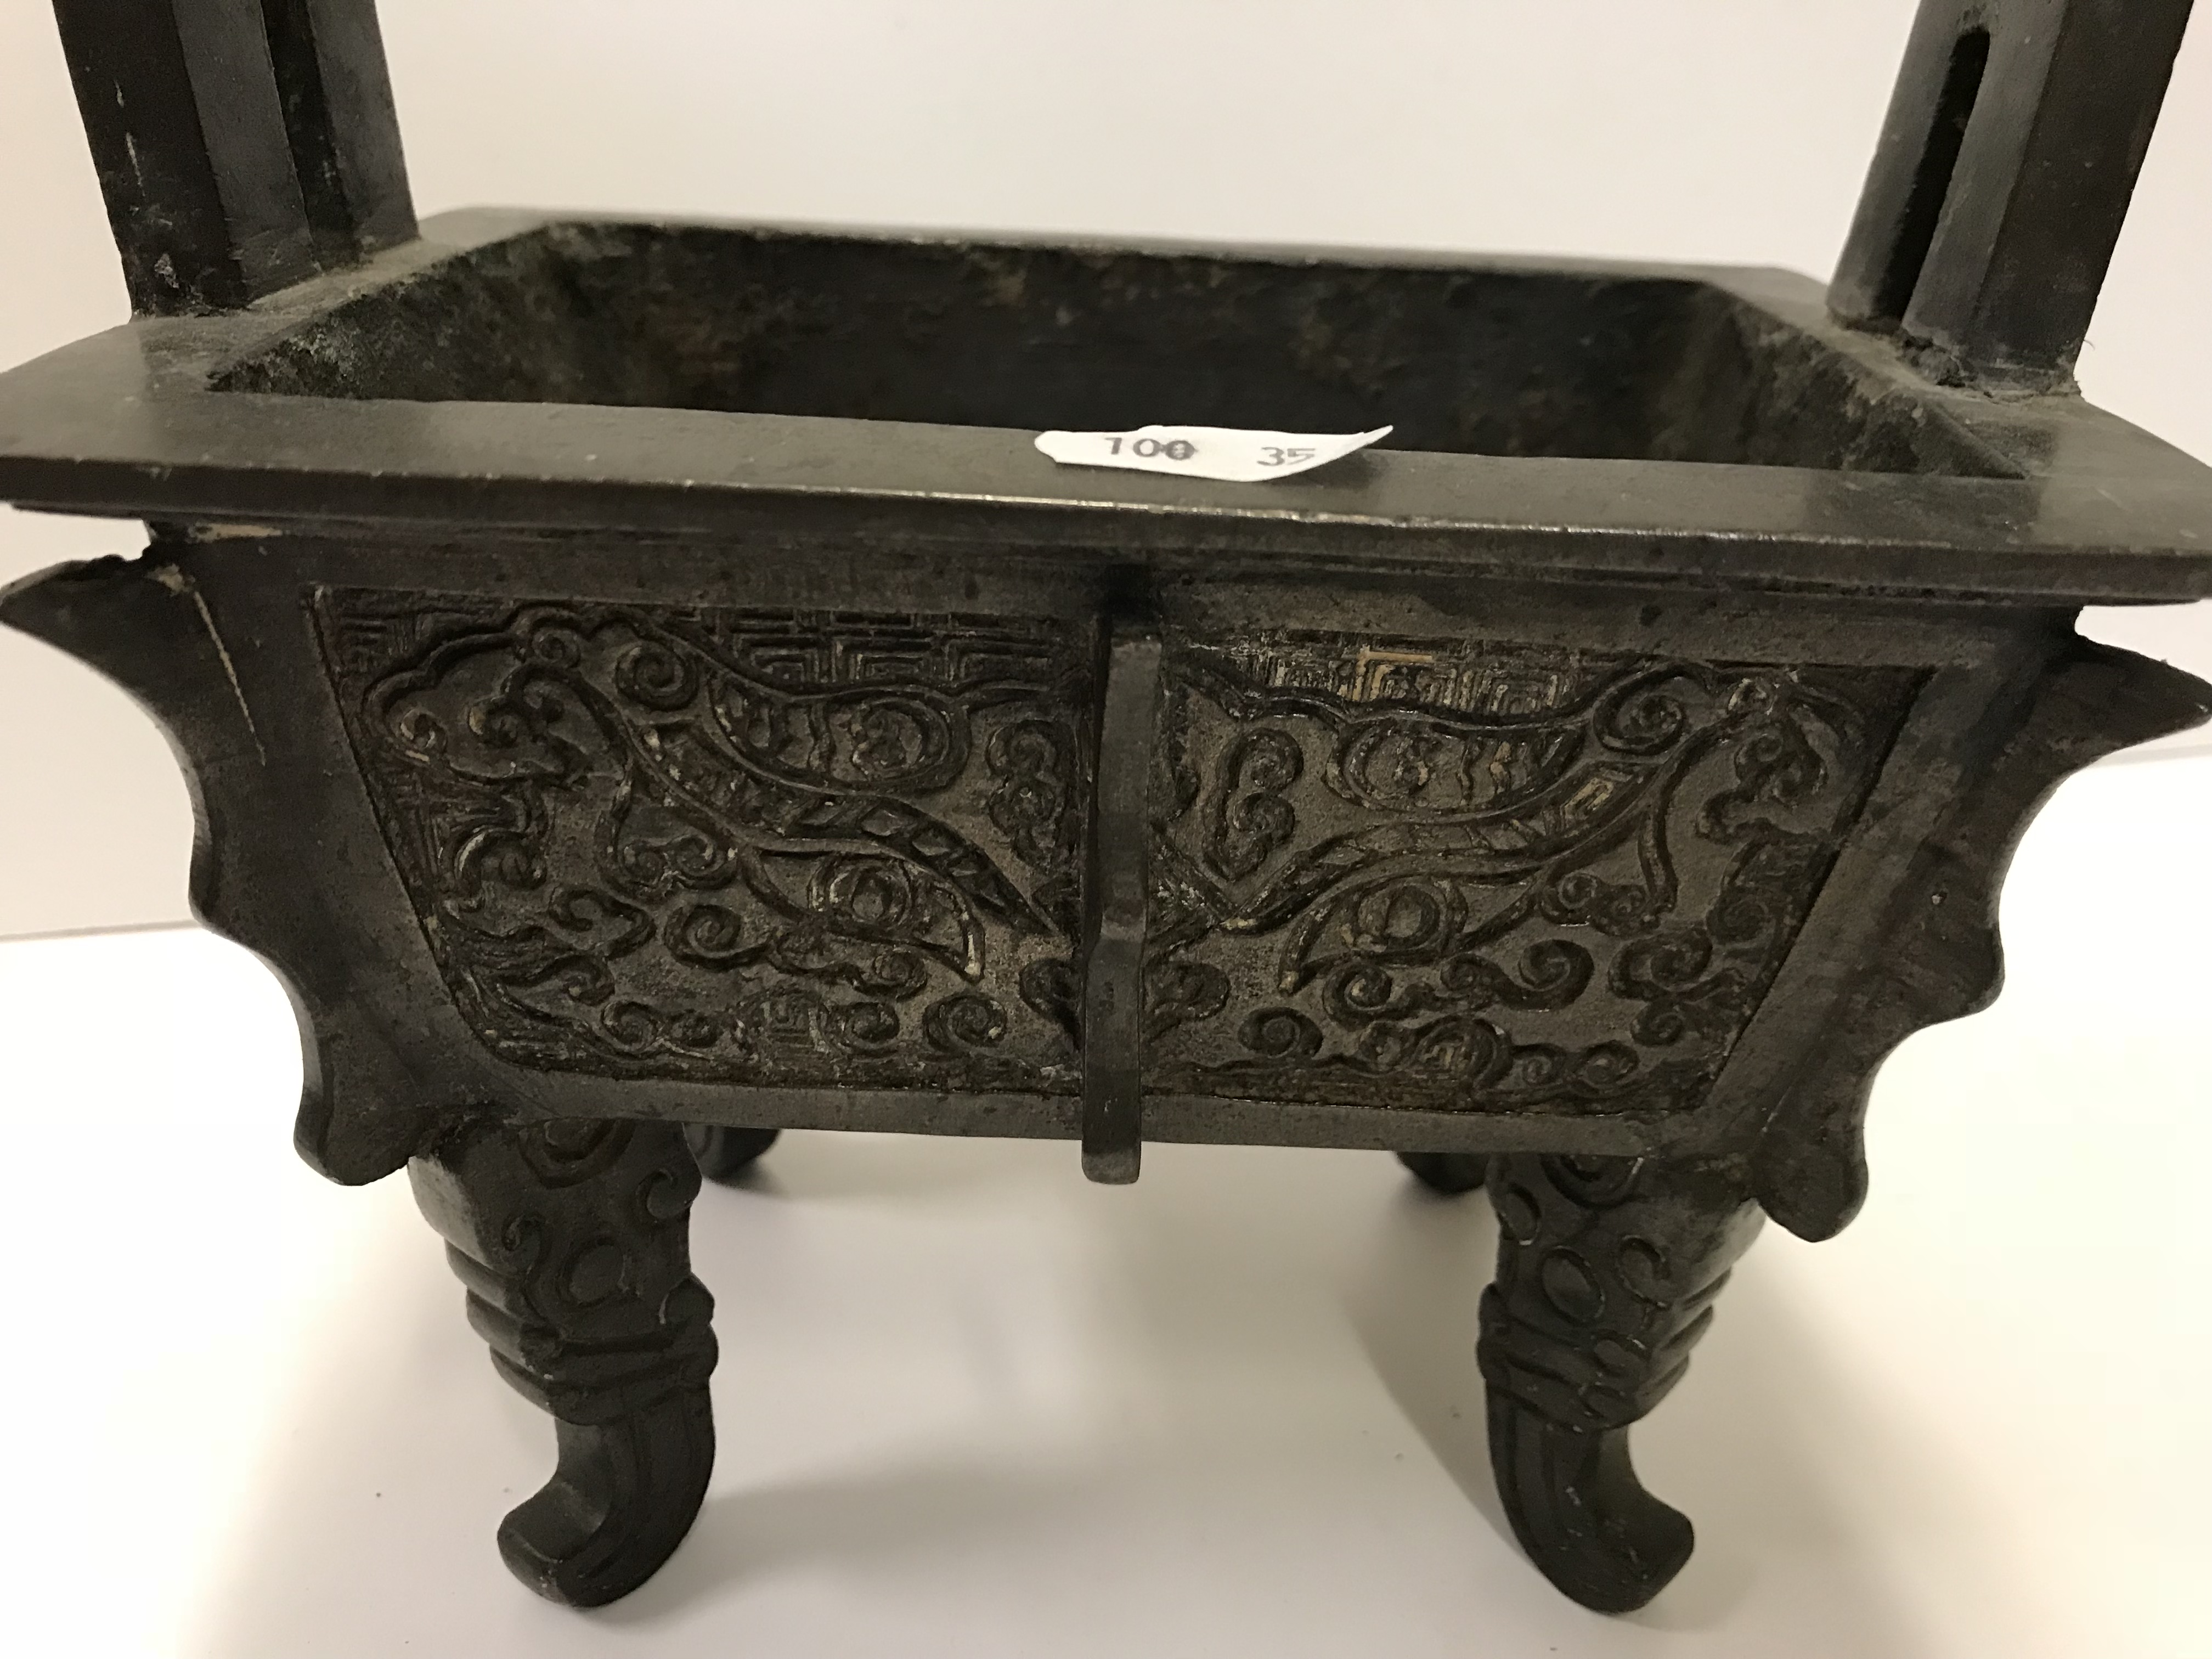 A Chinese bronze censer of rectangular form with relief work foliate decoration, - Image 15 of 19